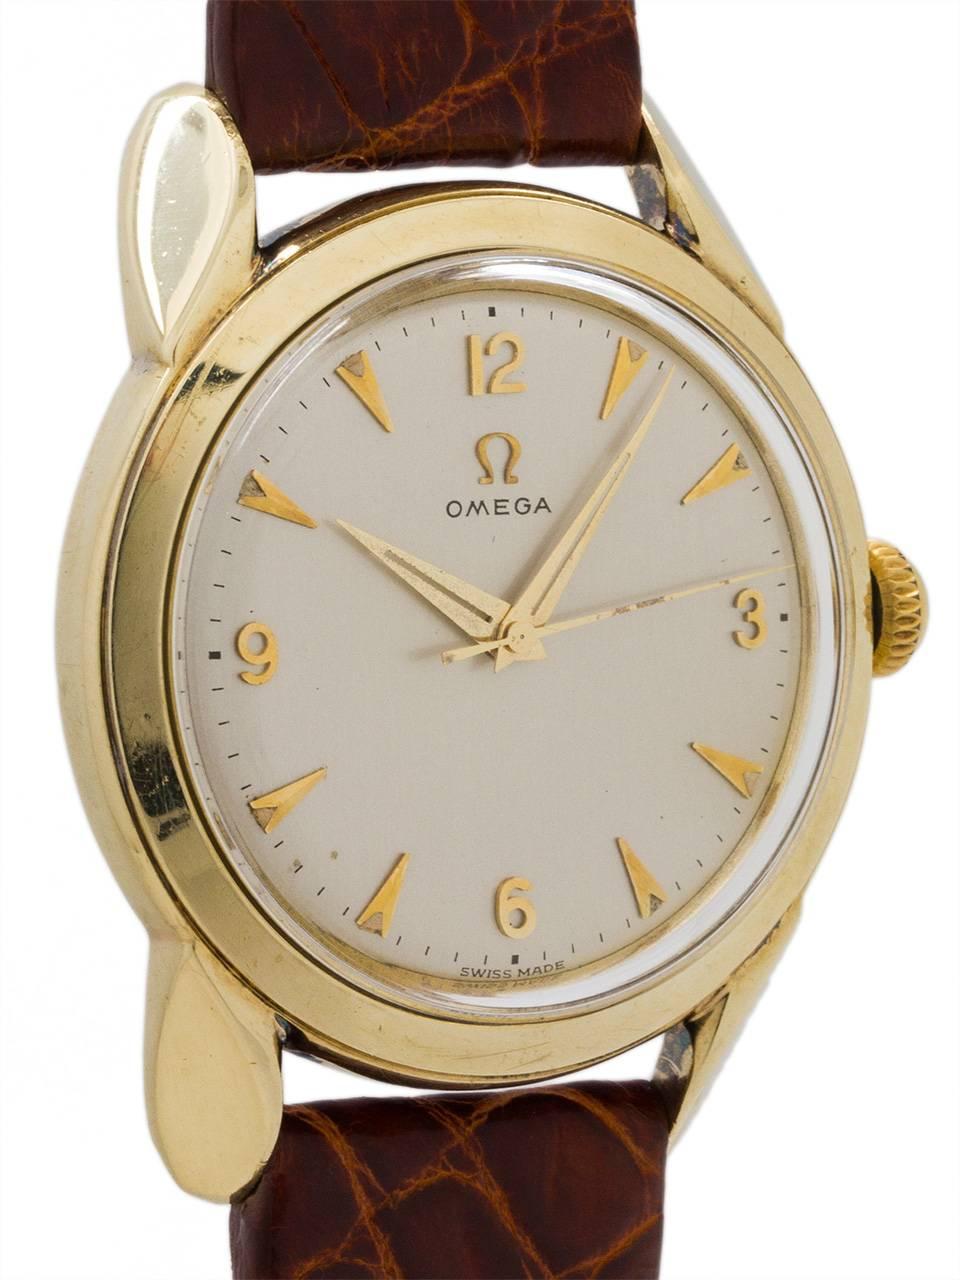 Retro Omega Yellow Gold Stainless Steel Oversize Dress Model Automatic Wristwatch For Sale